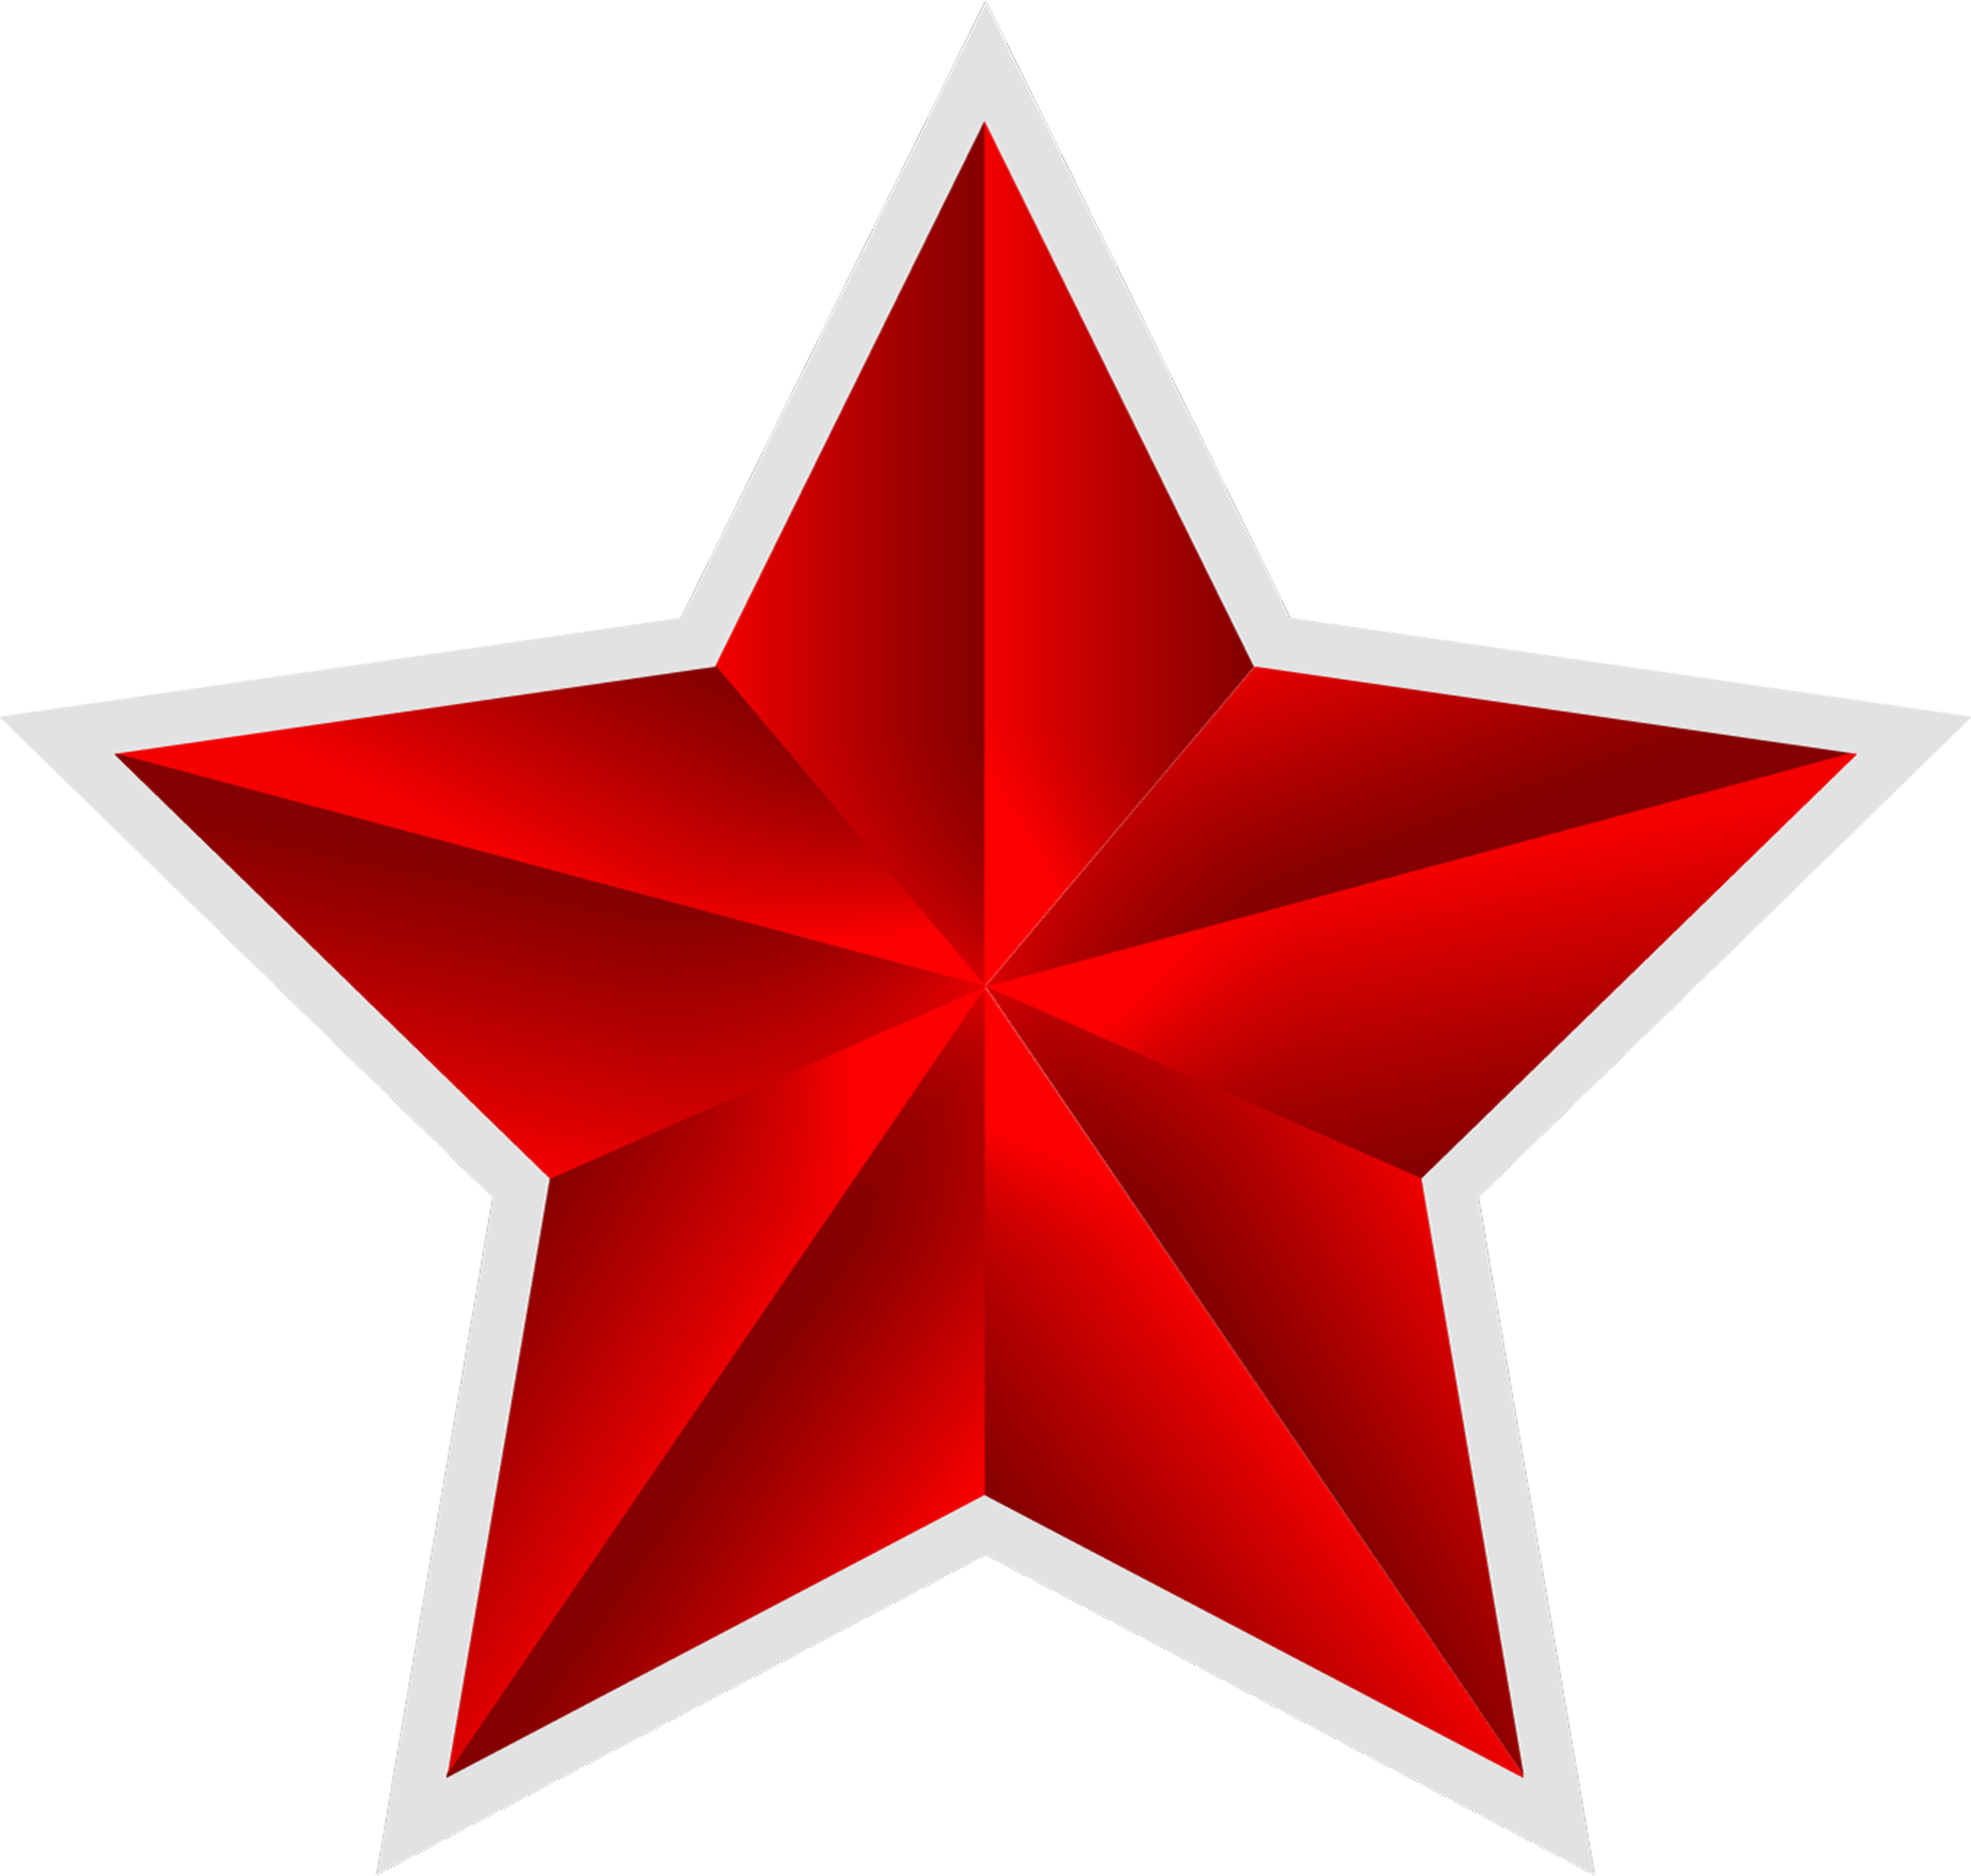 Red Star Shape PNG Image